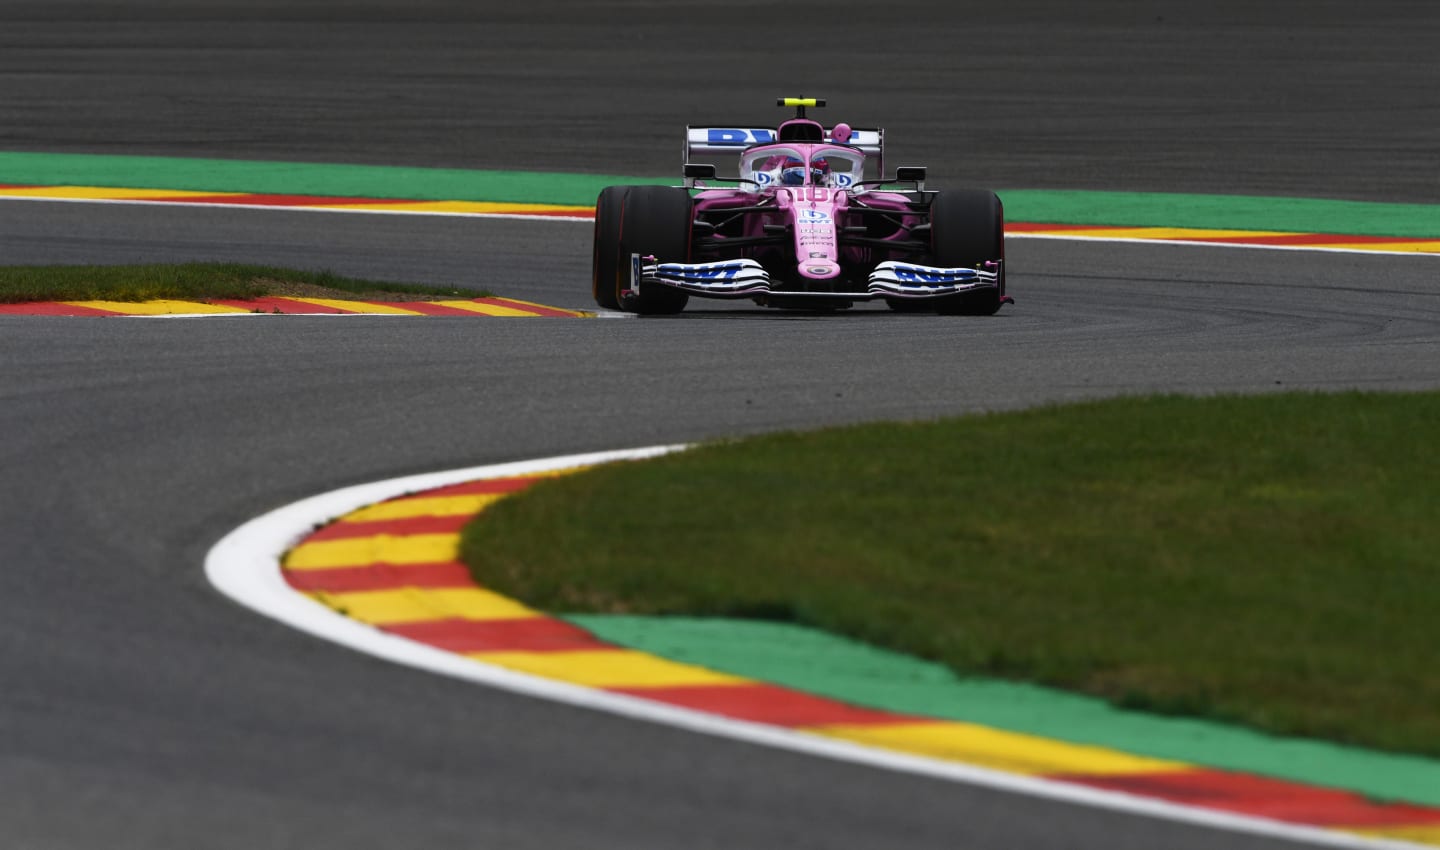 SPA, BELGIUM - AUGUST 28: Lance Stroll of Canada driving the (18) Racing Point RP20 Mercedes drives during practice for the F1 Grand Prix of Belgium at Circuit de Spa-Francorchamps on August 28, 2020 in Spa, Belgium. (Photo by Rudy Carezzevoli/Getty Images)